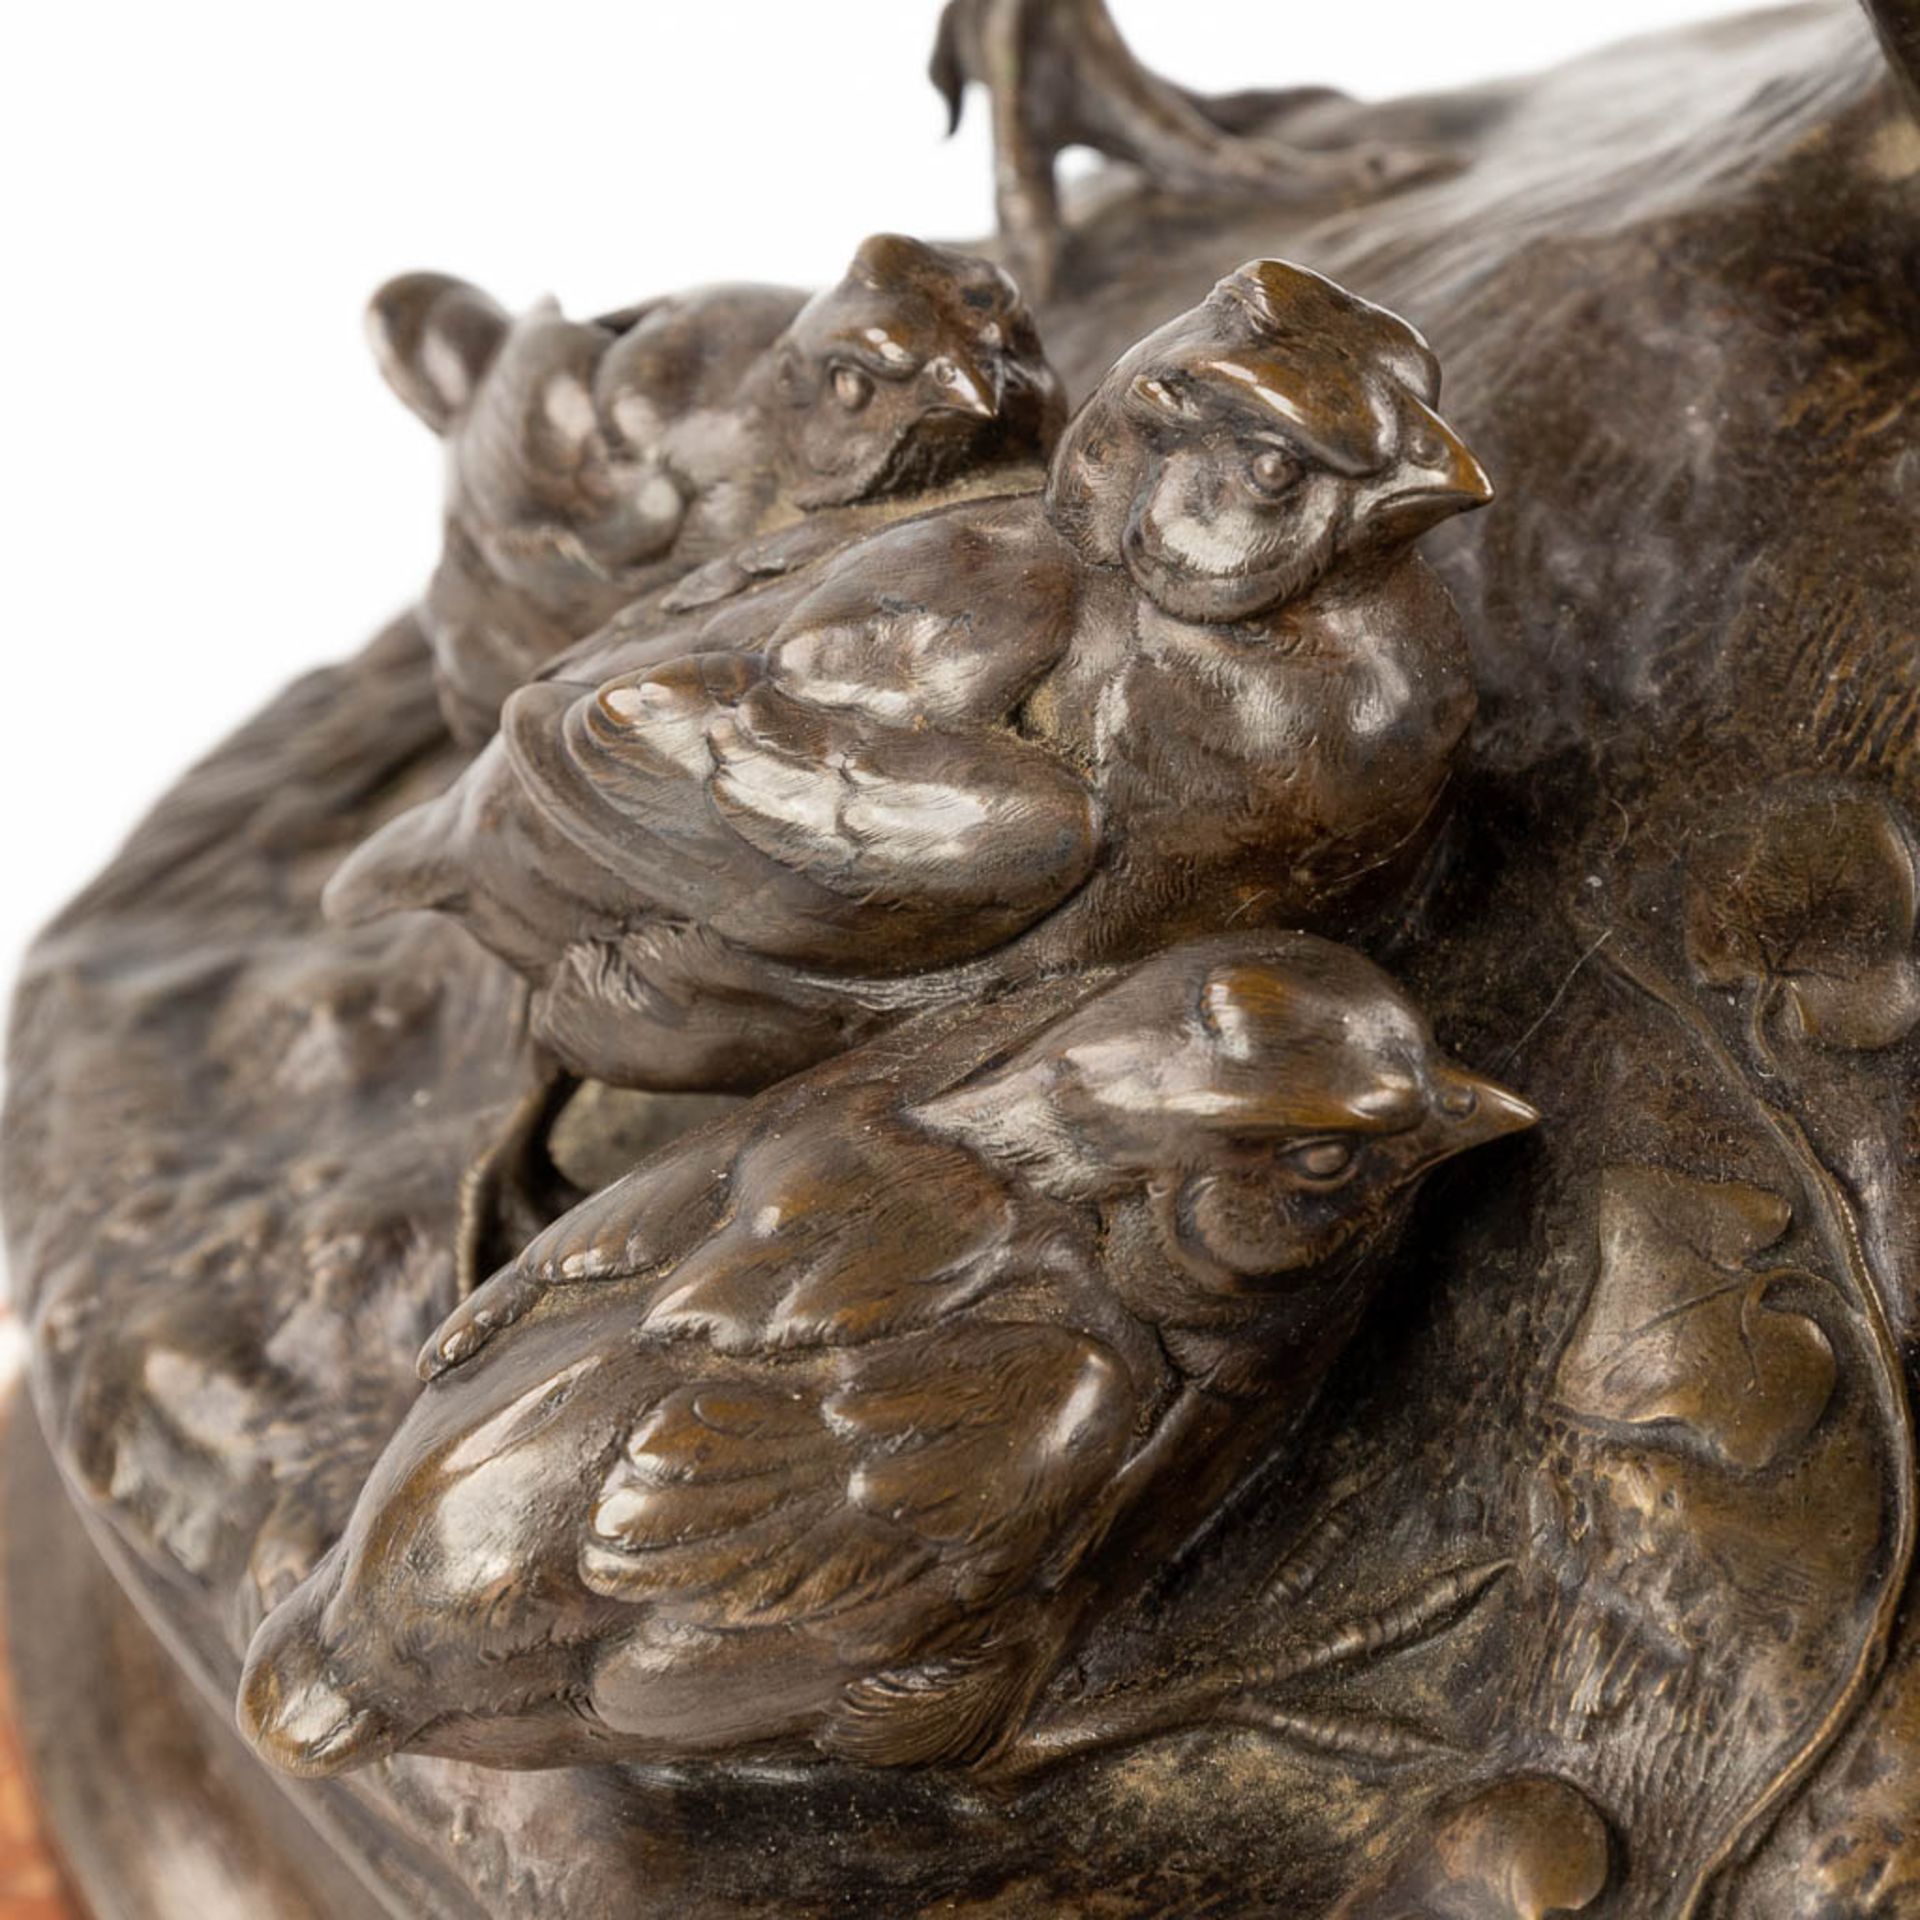 Alphonse ARSON (1822-1895) 'Partridge with chicks' patinated bronze. 1877. (D:22 x W:40 x H:41 cm) - Image 10 of 14